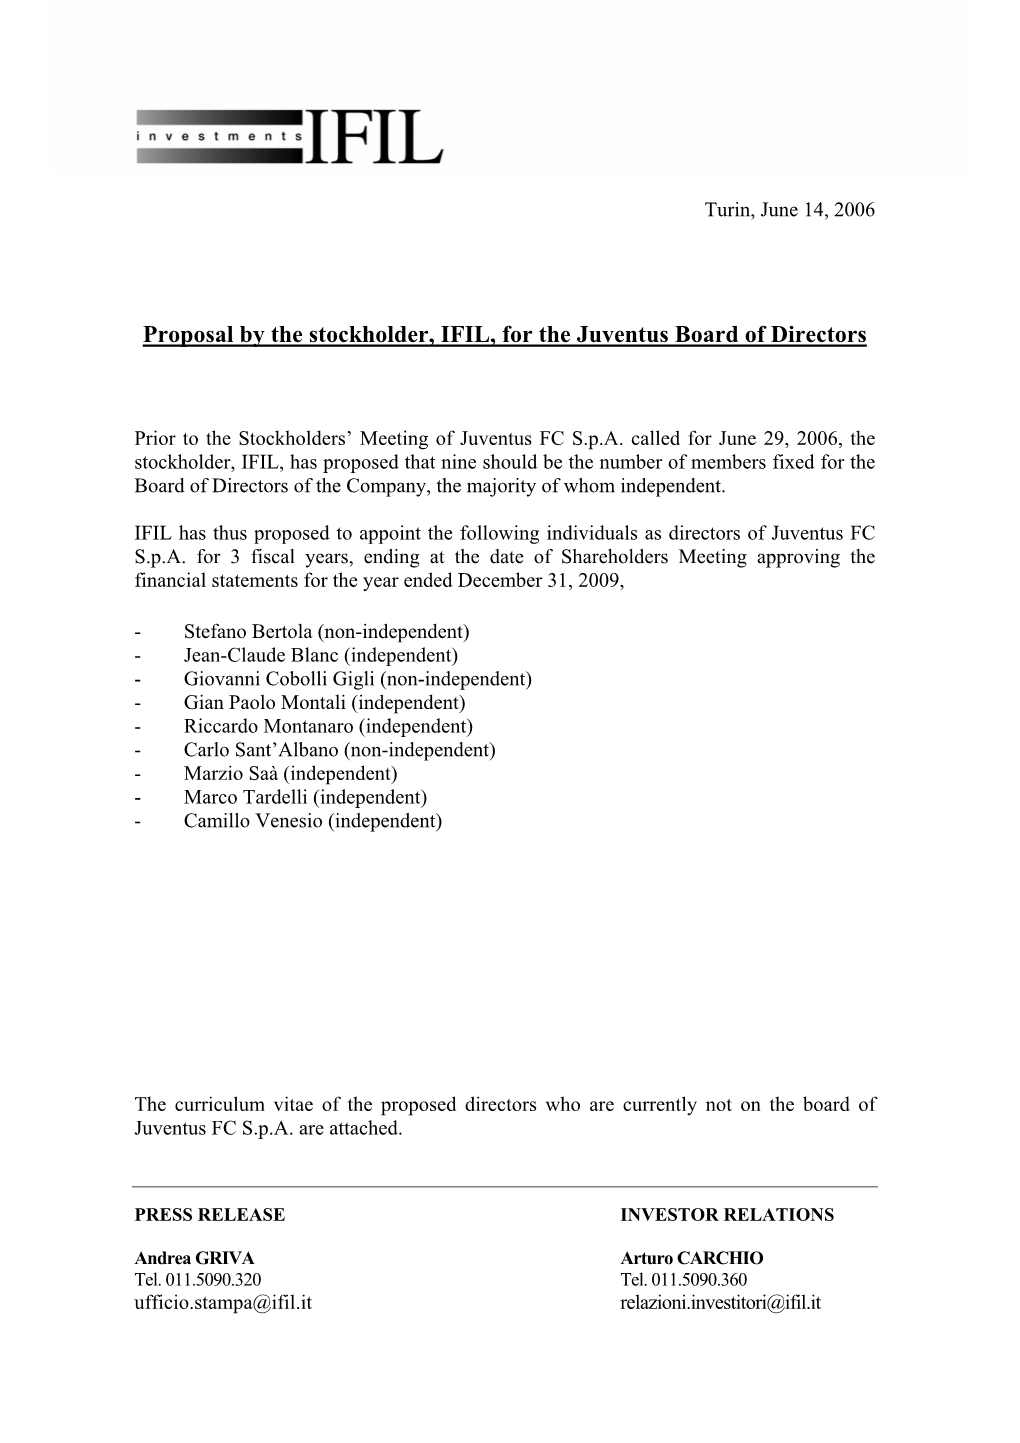 Proposal by the Stockholder, IFIL, for the Juventus Board of Directors